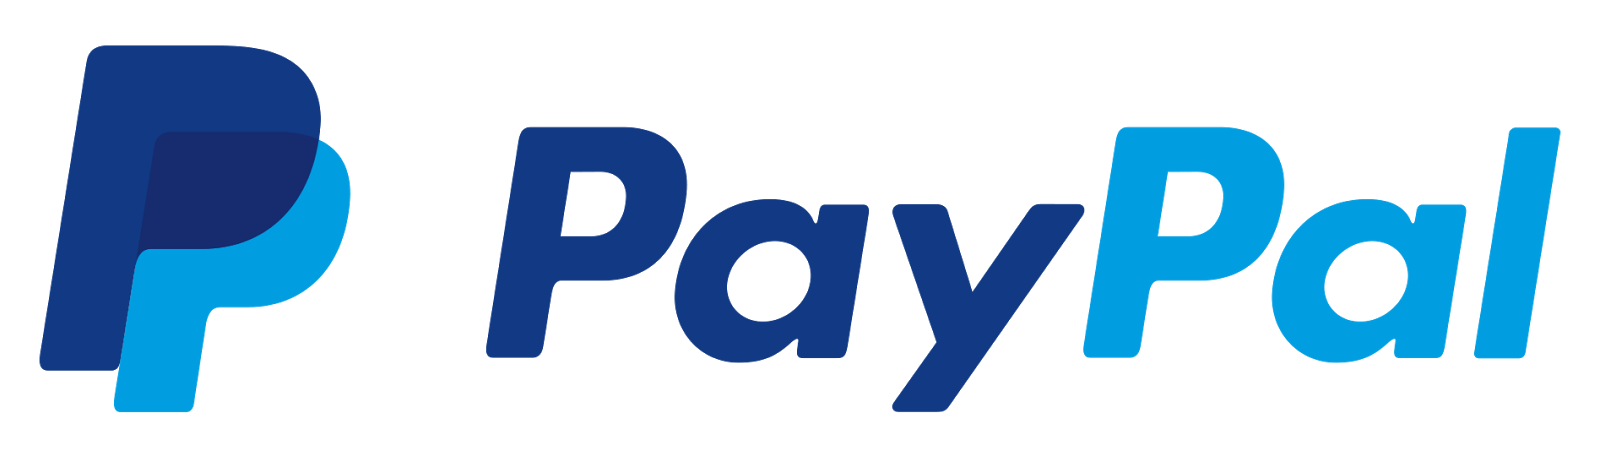 Weezly accepts Paypal to charge for your scheduled meetings